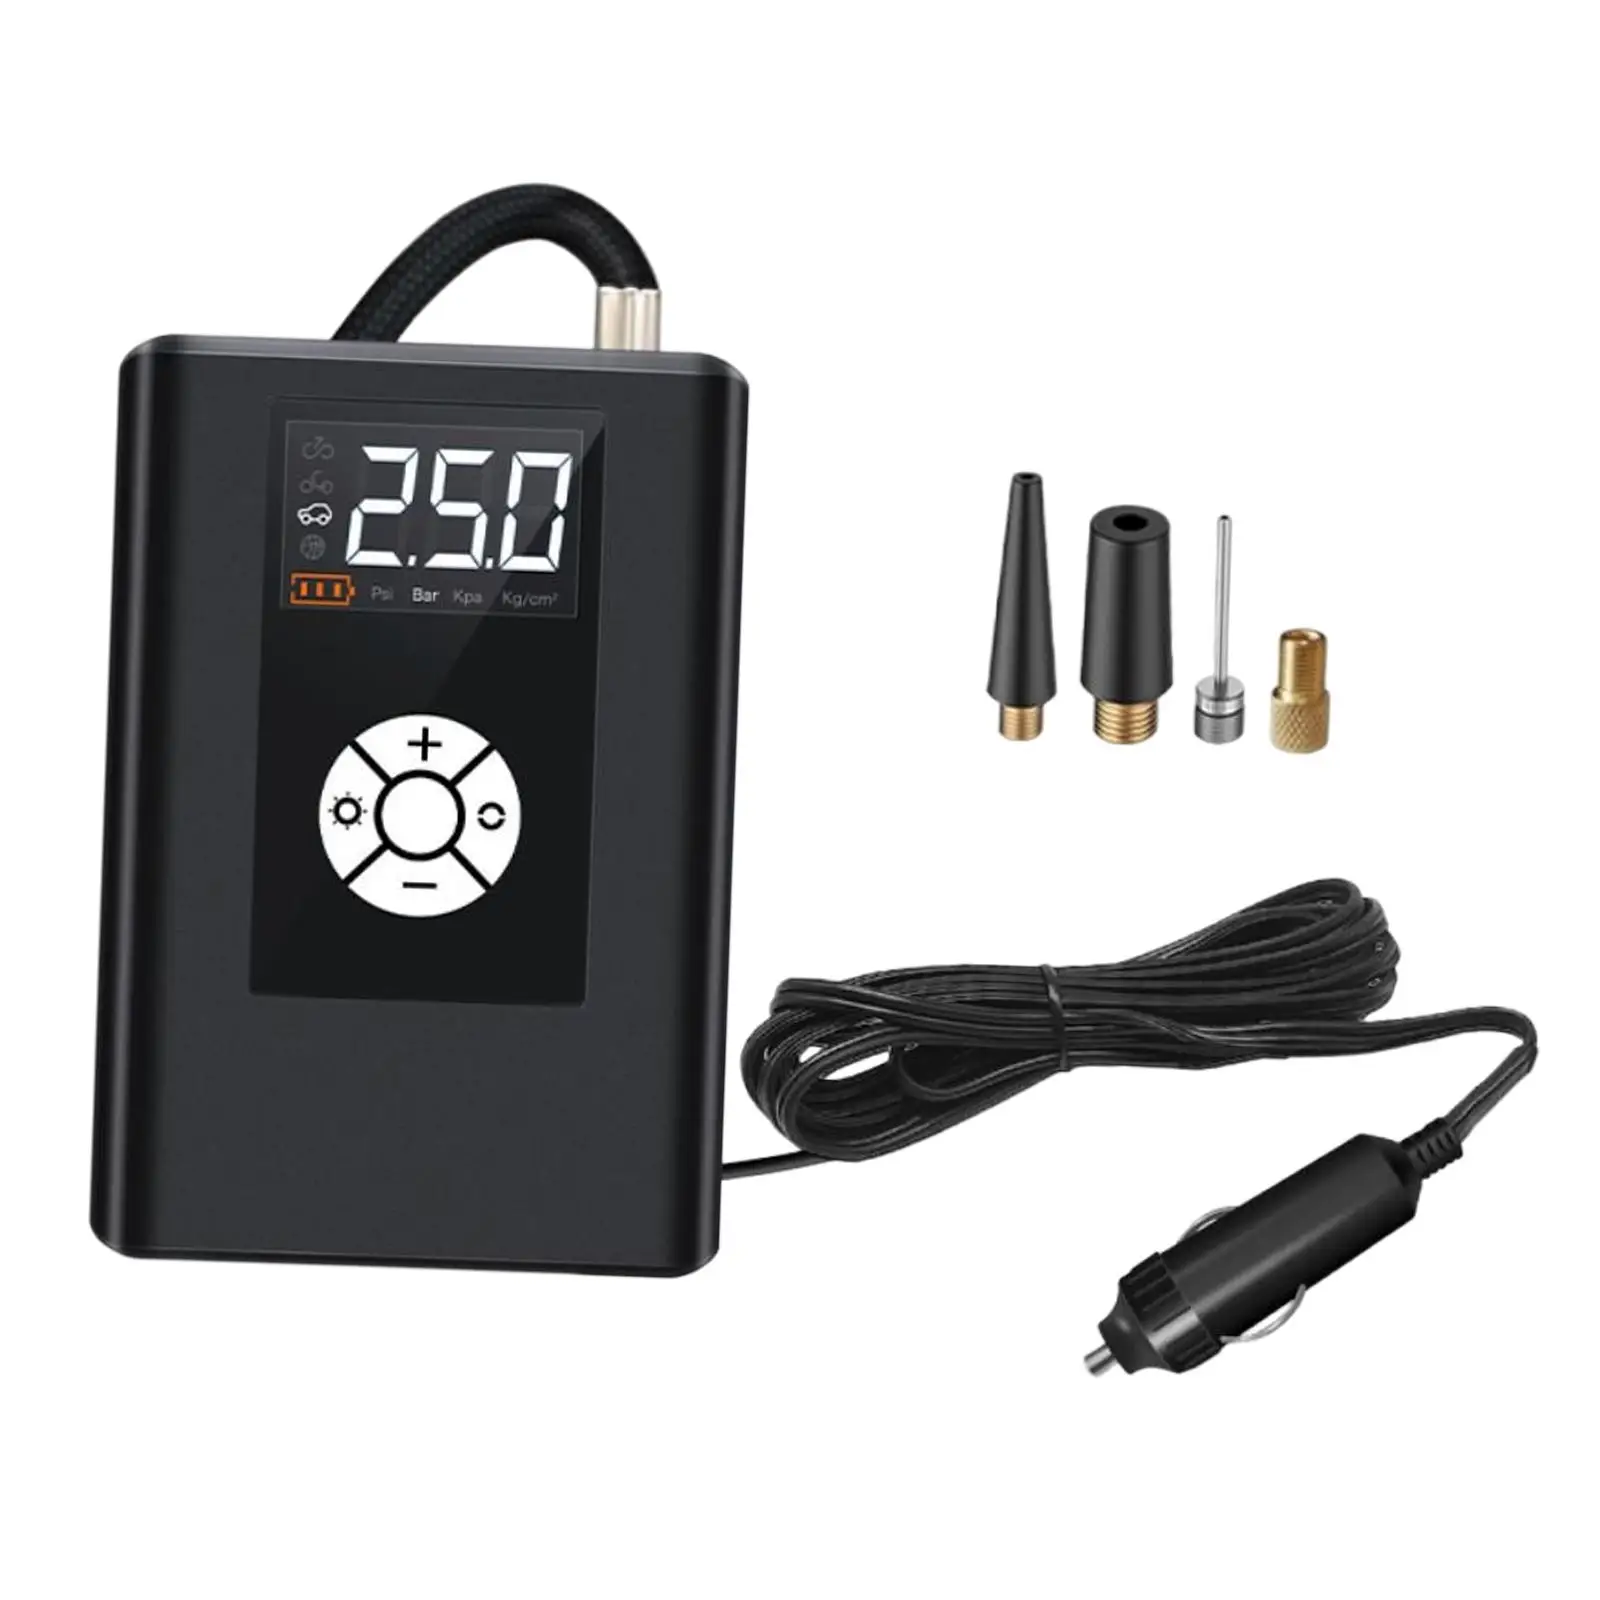 Portable car tire inflator with compact digital pressure gauge